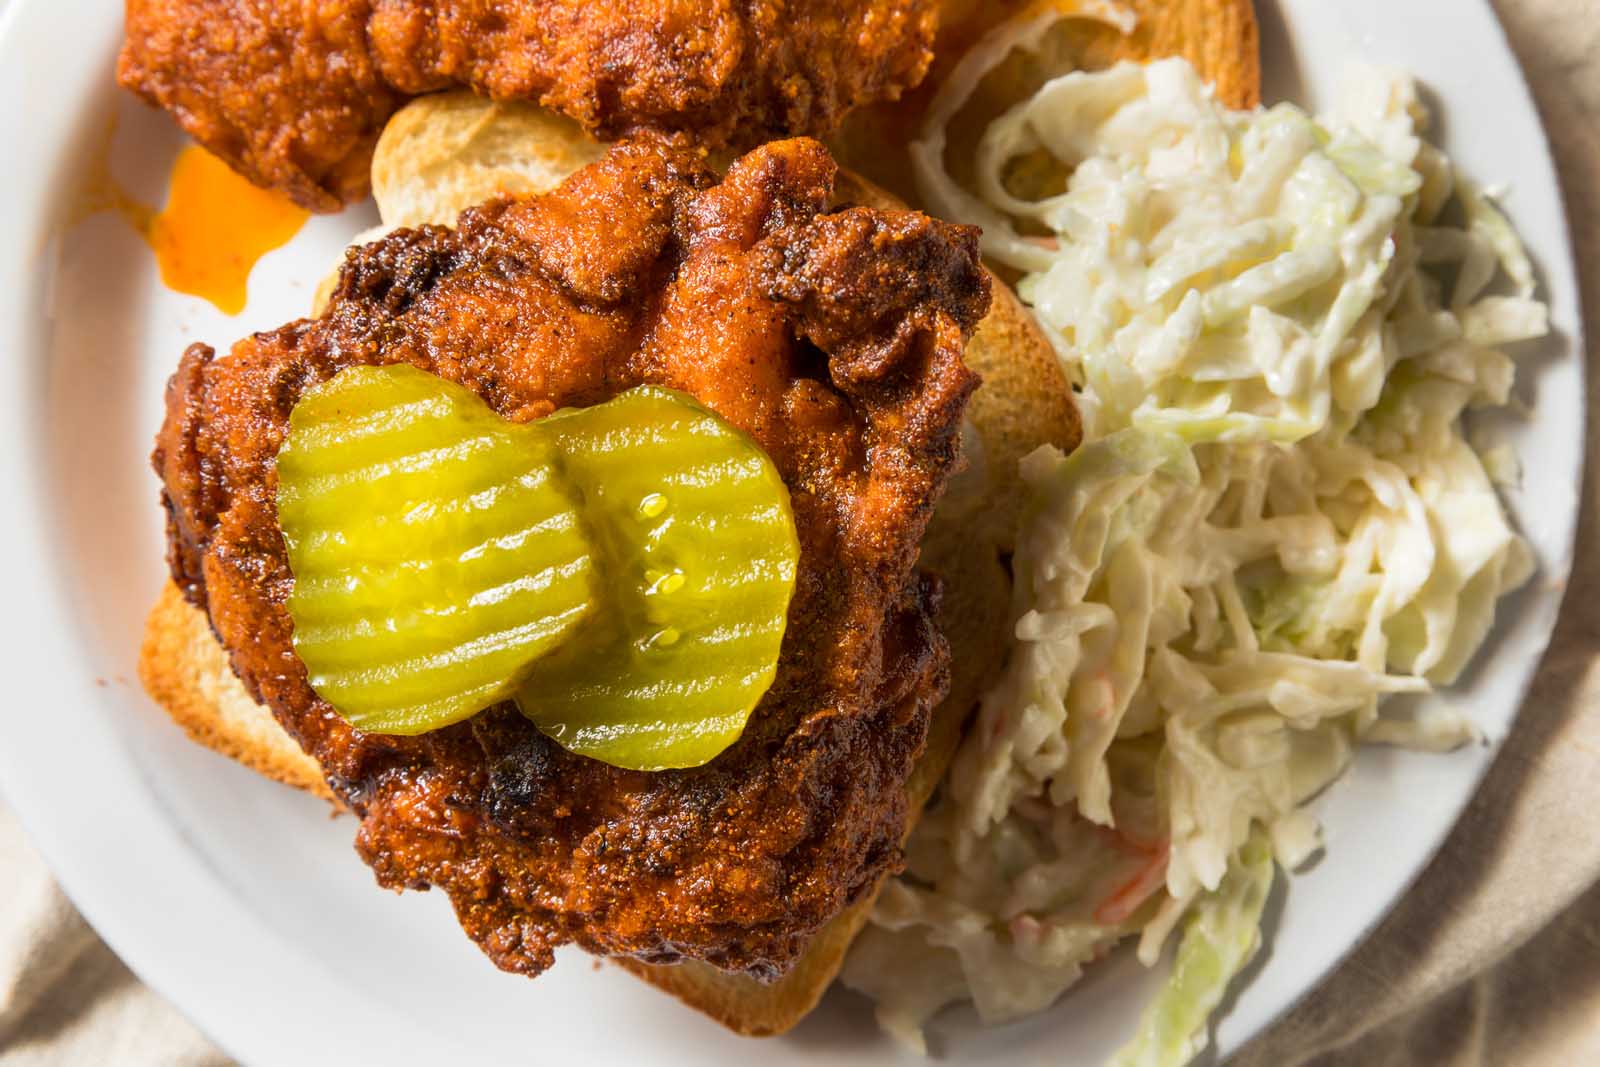 Where to stay in East Nashville Hot Chicken